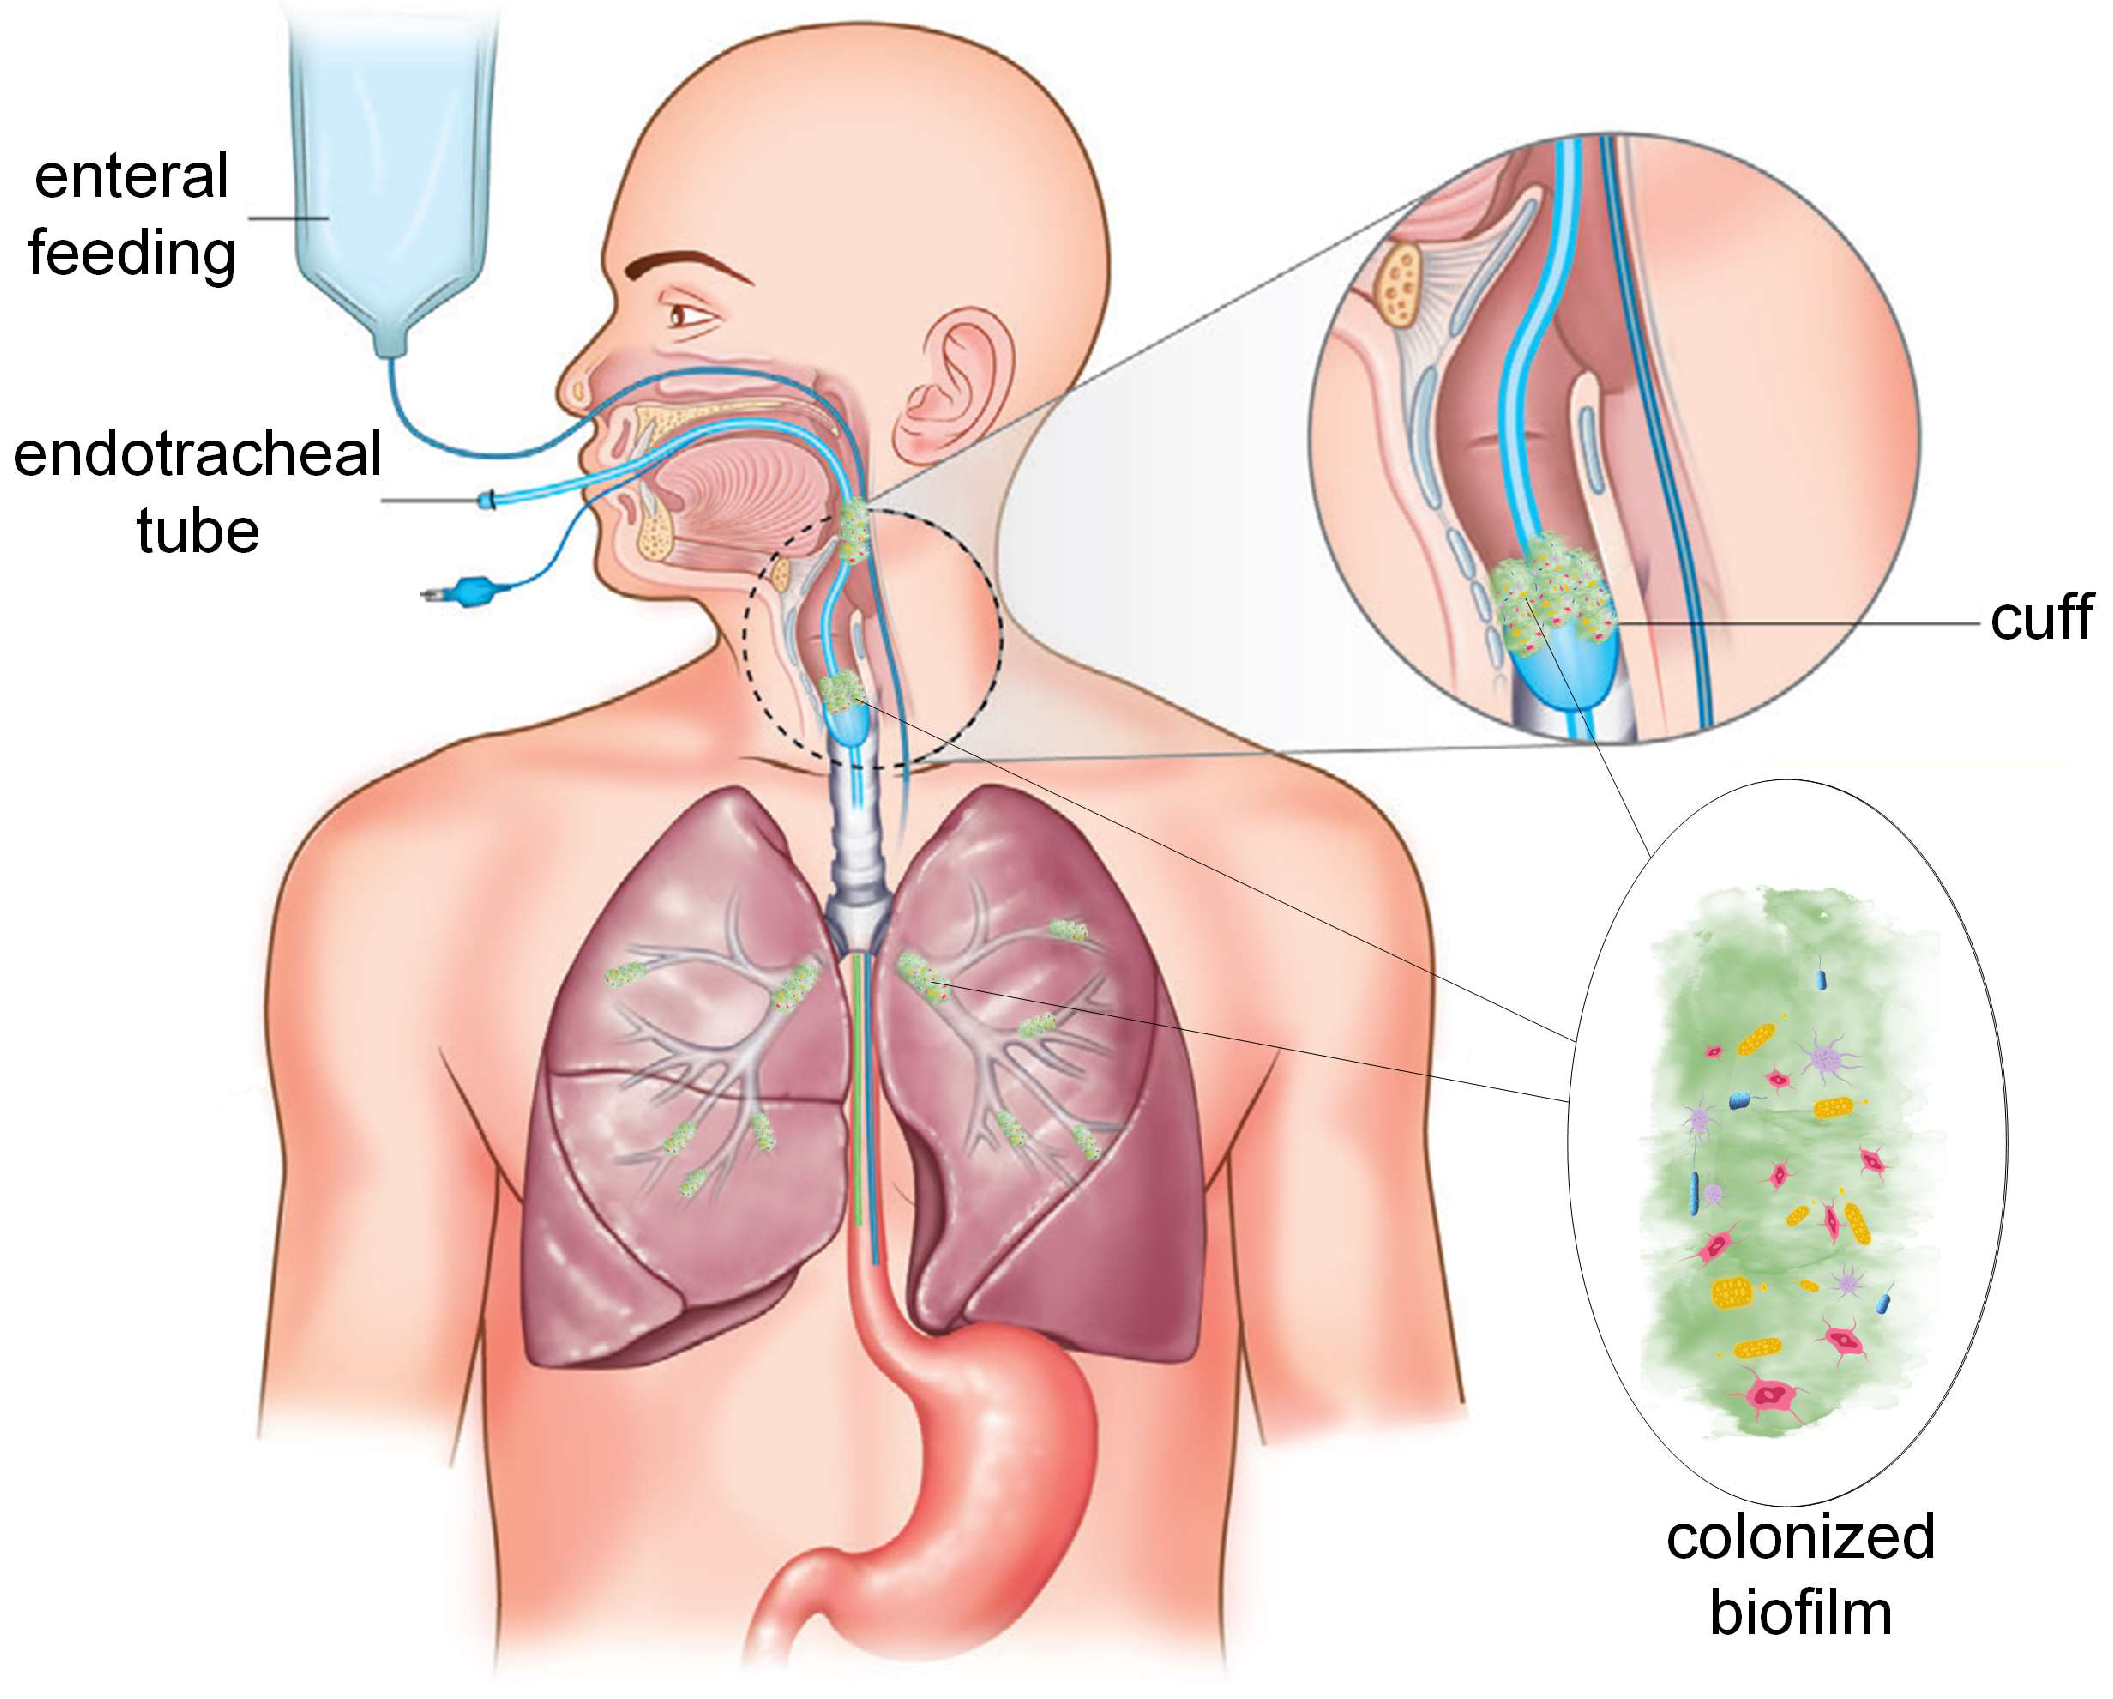 Materials | Free Full-Text | Antimicrobial Solutions for Endotracheal Tubes  in Prevention of Ventilator-Associated Pneumonia